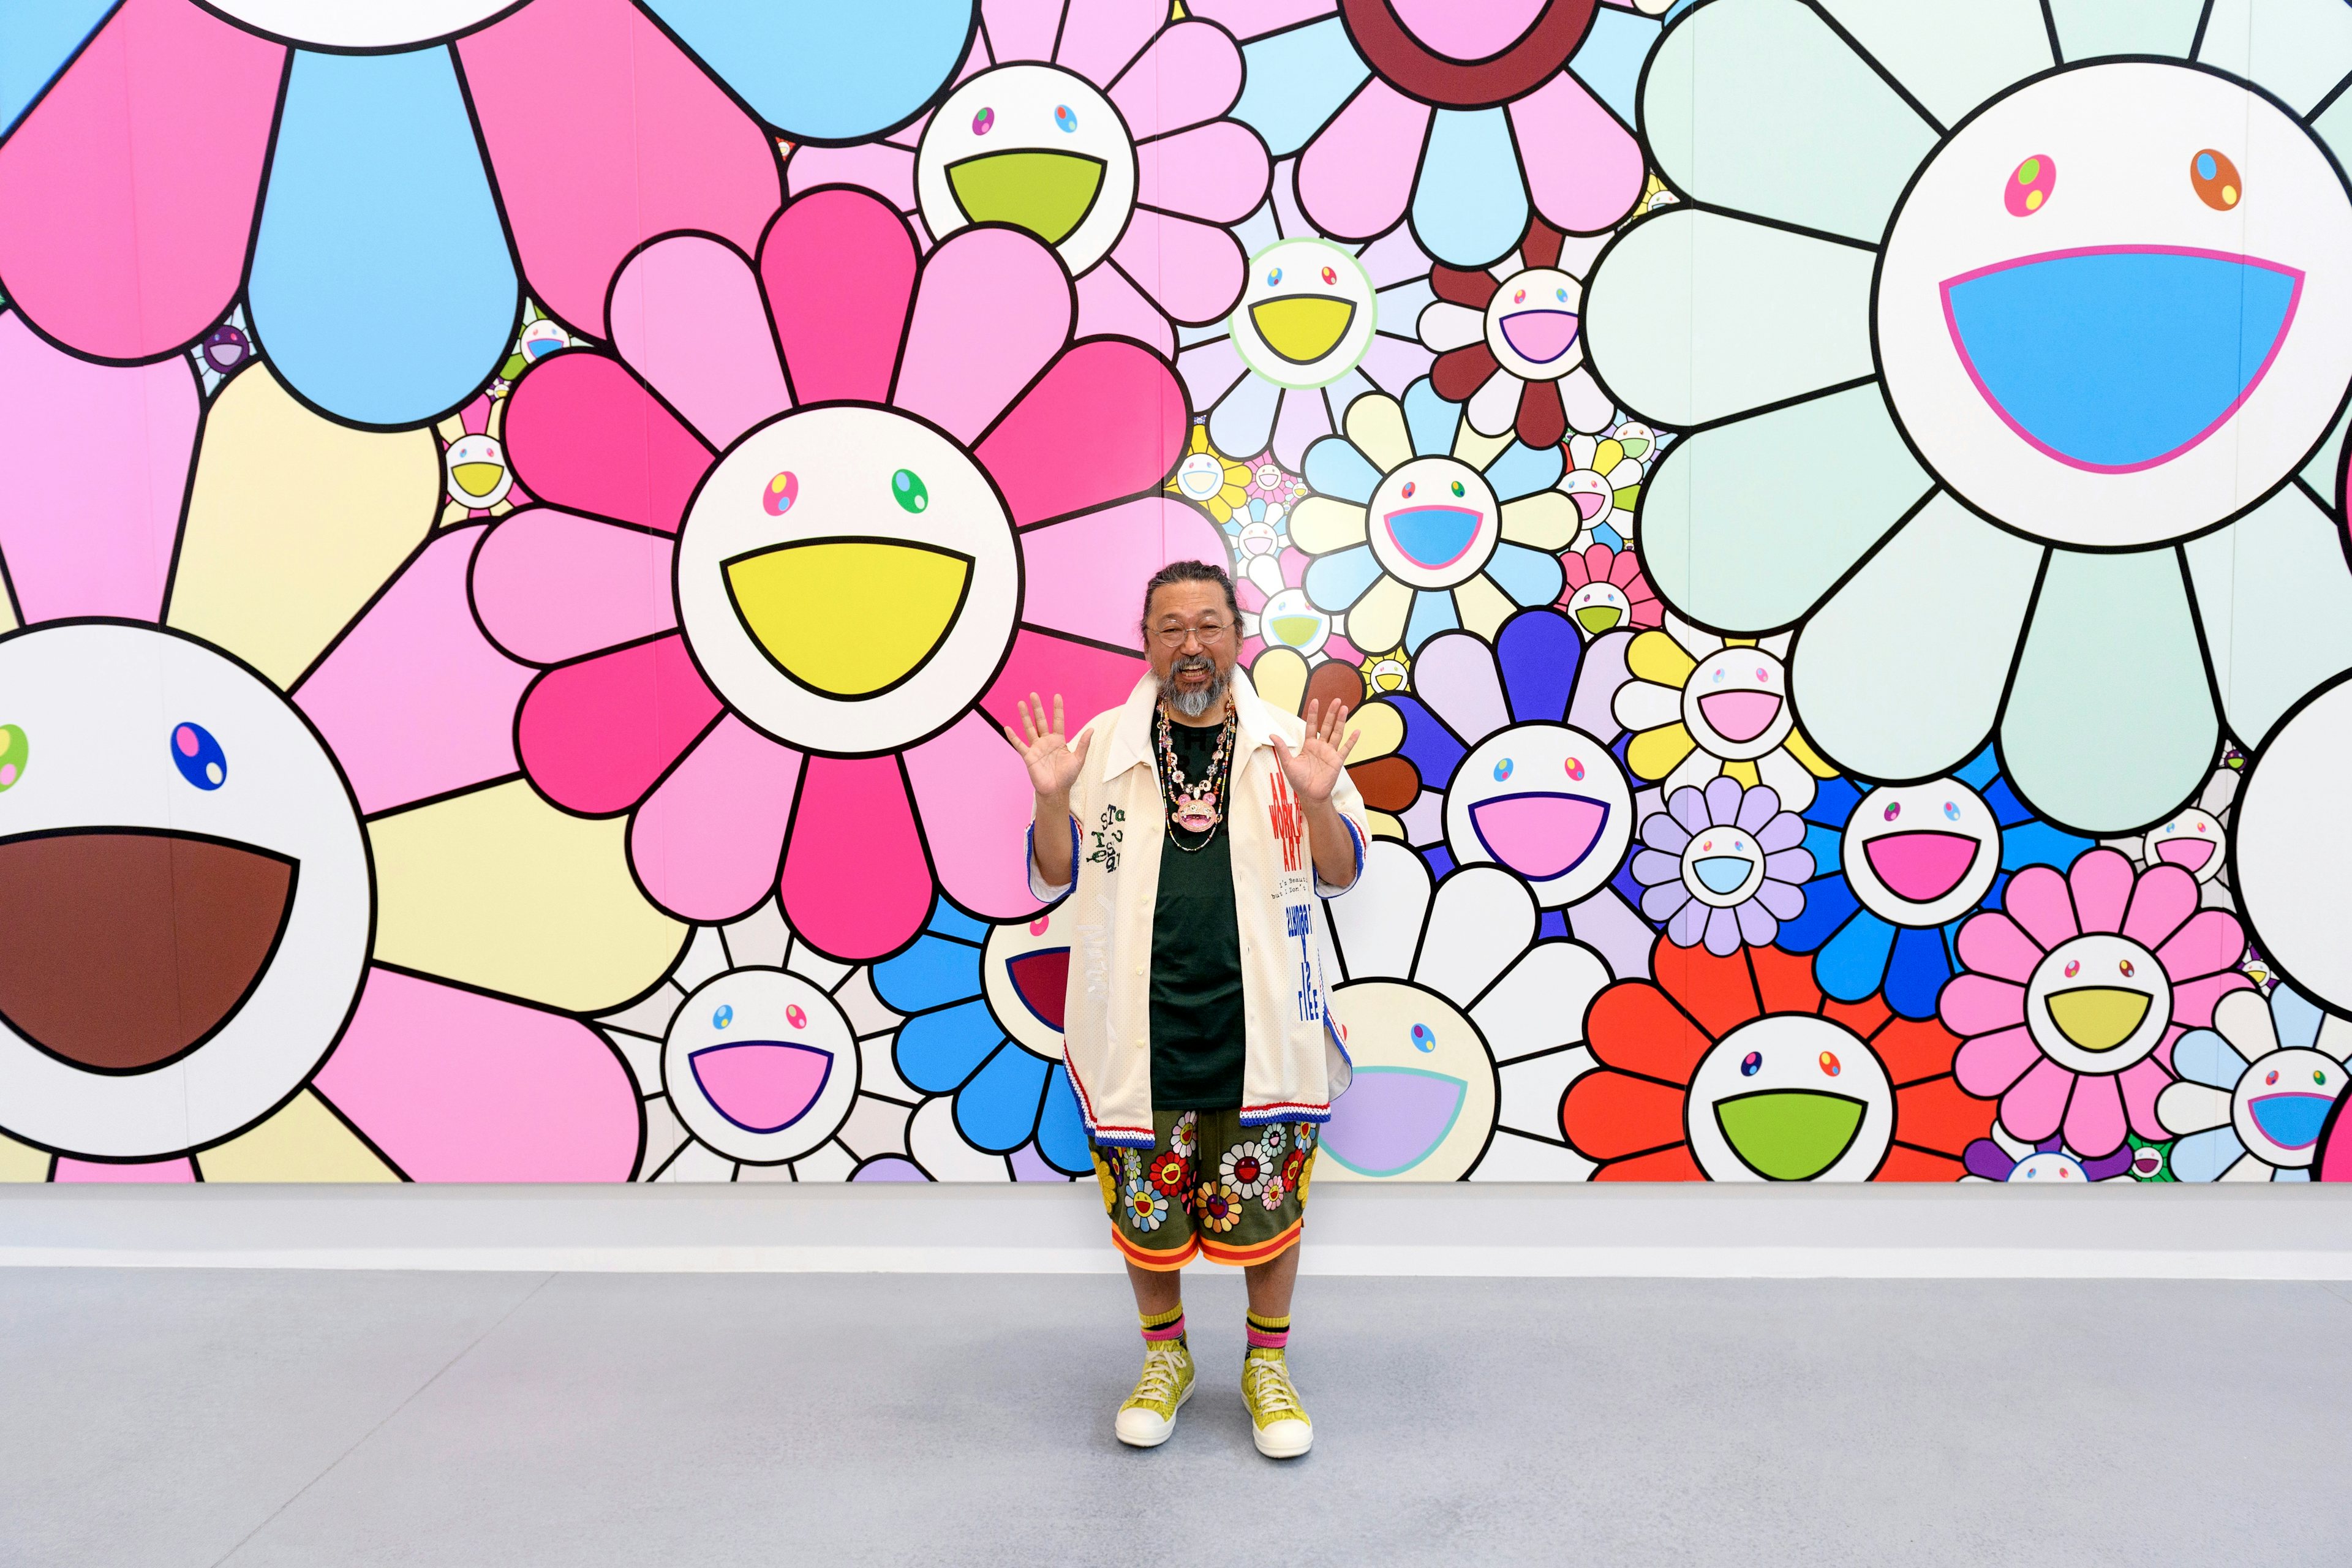 Takashi Murakami is responsible for a new postmodern art movement called “Superflat,” inspired by the 2D images seen in manga and anime. Image: Kristy Sparow/Getty Images